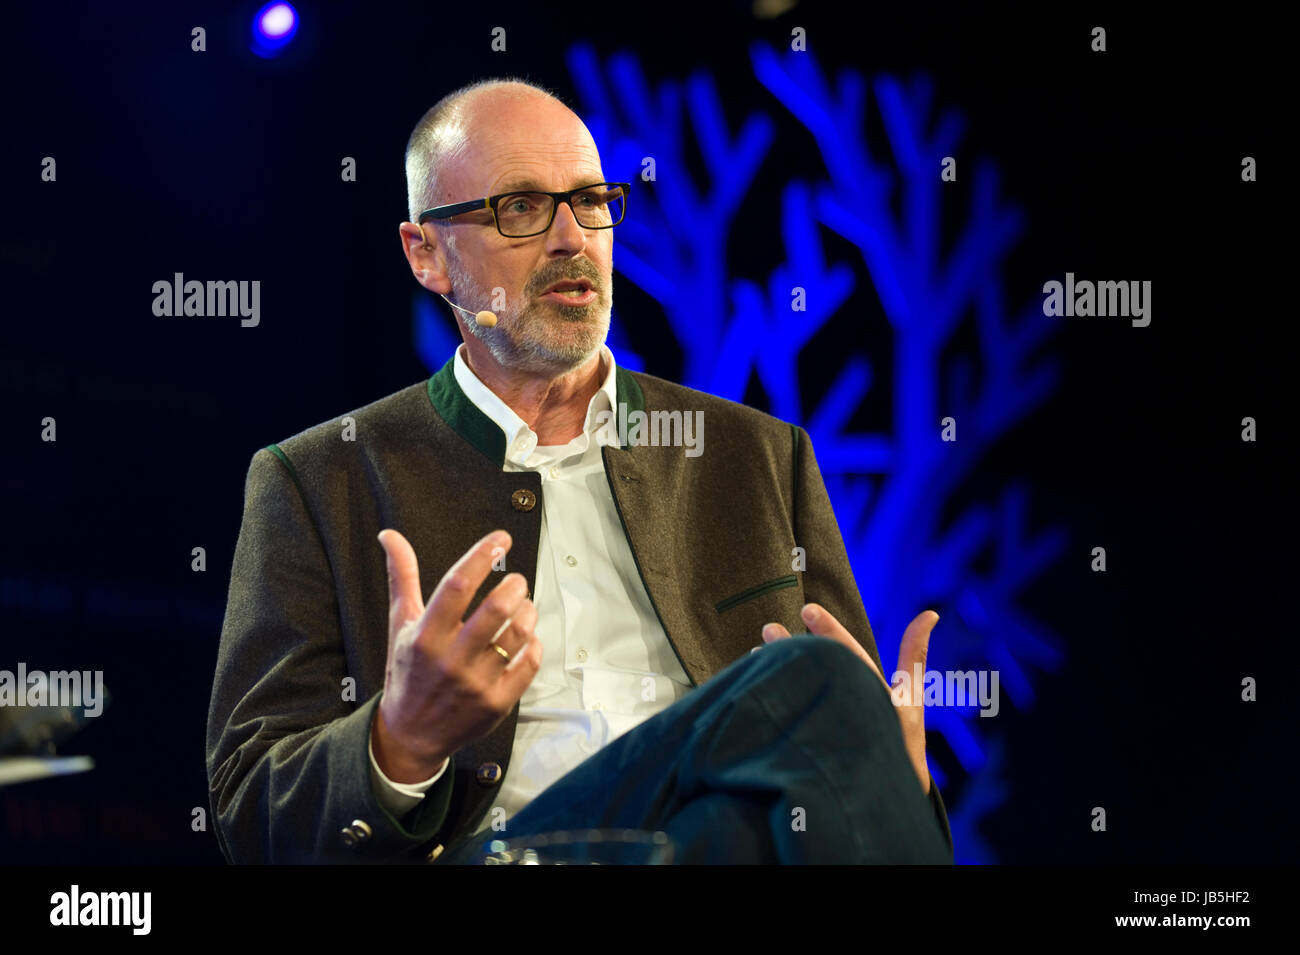 Peter Wohlleben German forester and author speaking on stage at Hay Festival 2017 Hay-on-Wye Powys Wales UK Stock Photo